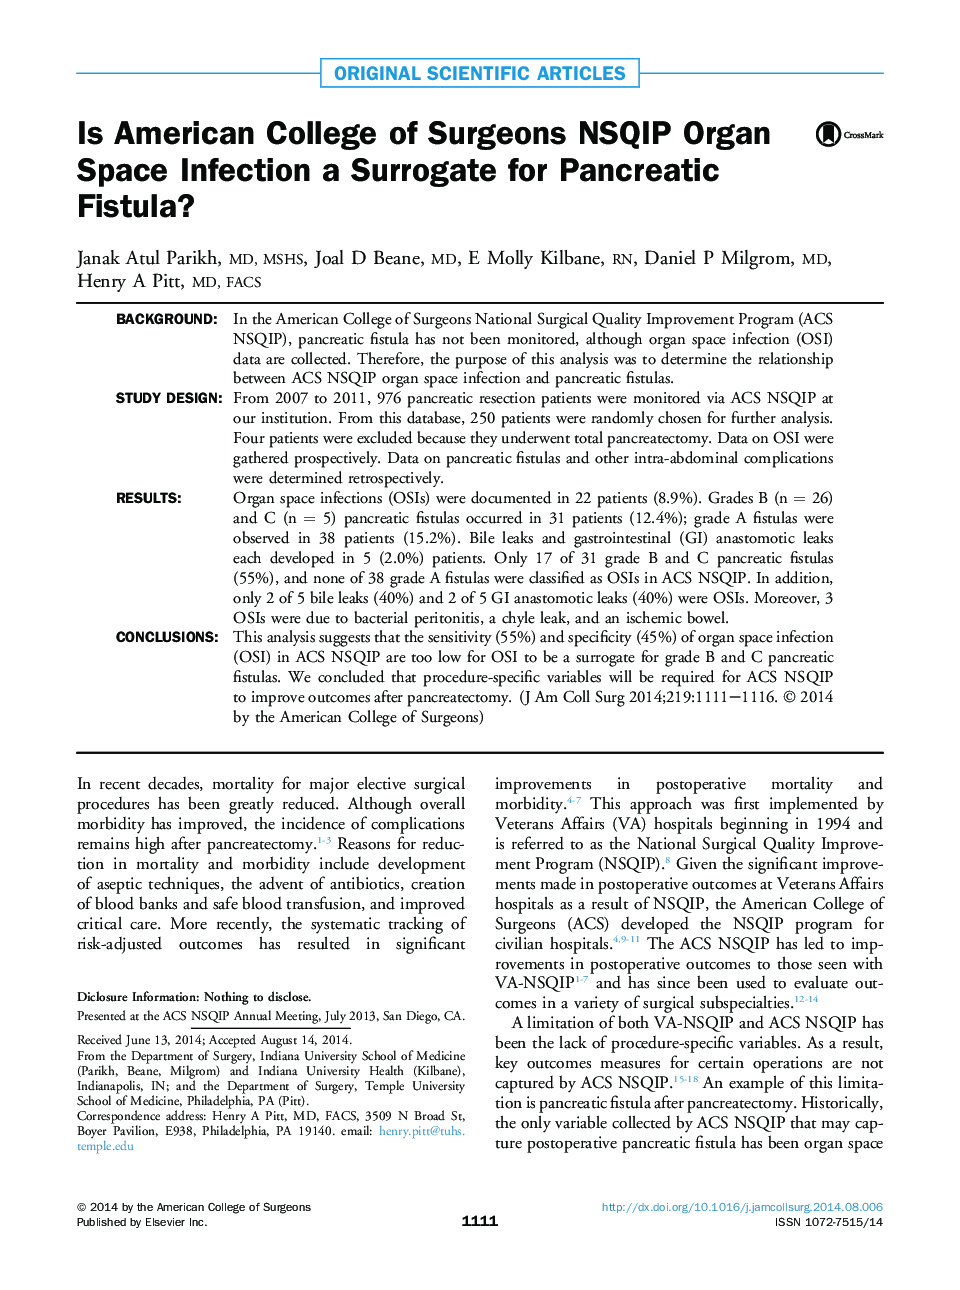 Is American College of Surgeons NSQIP Organ Space Infection a Surrogate for Pancreatic Fistula? 